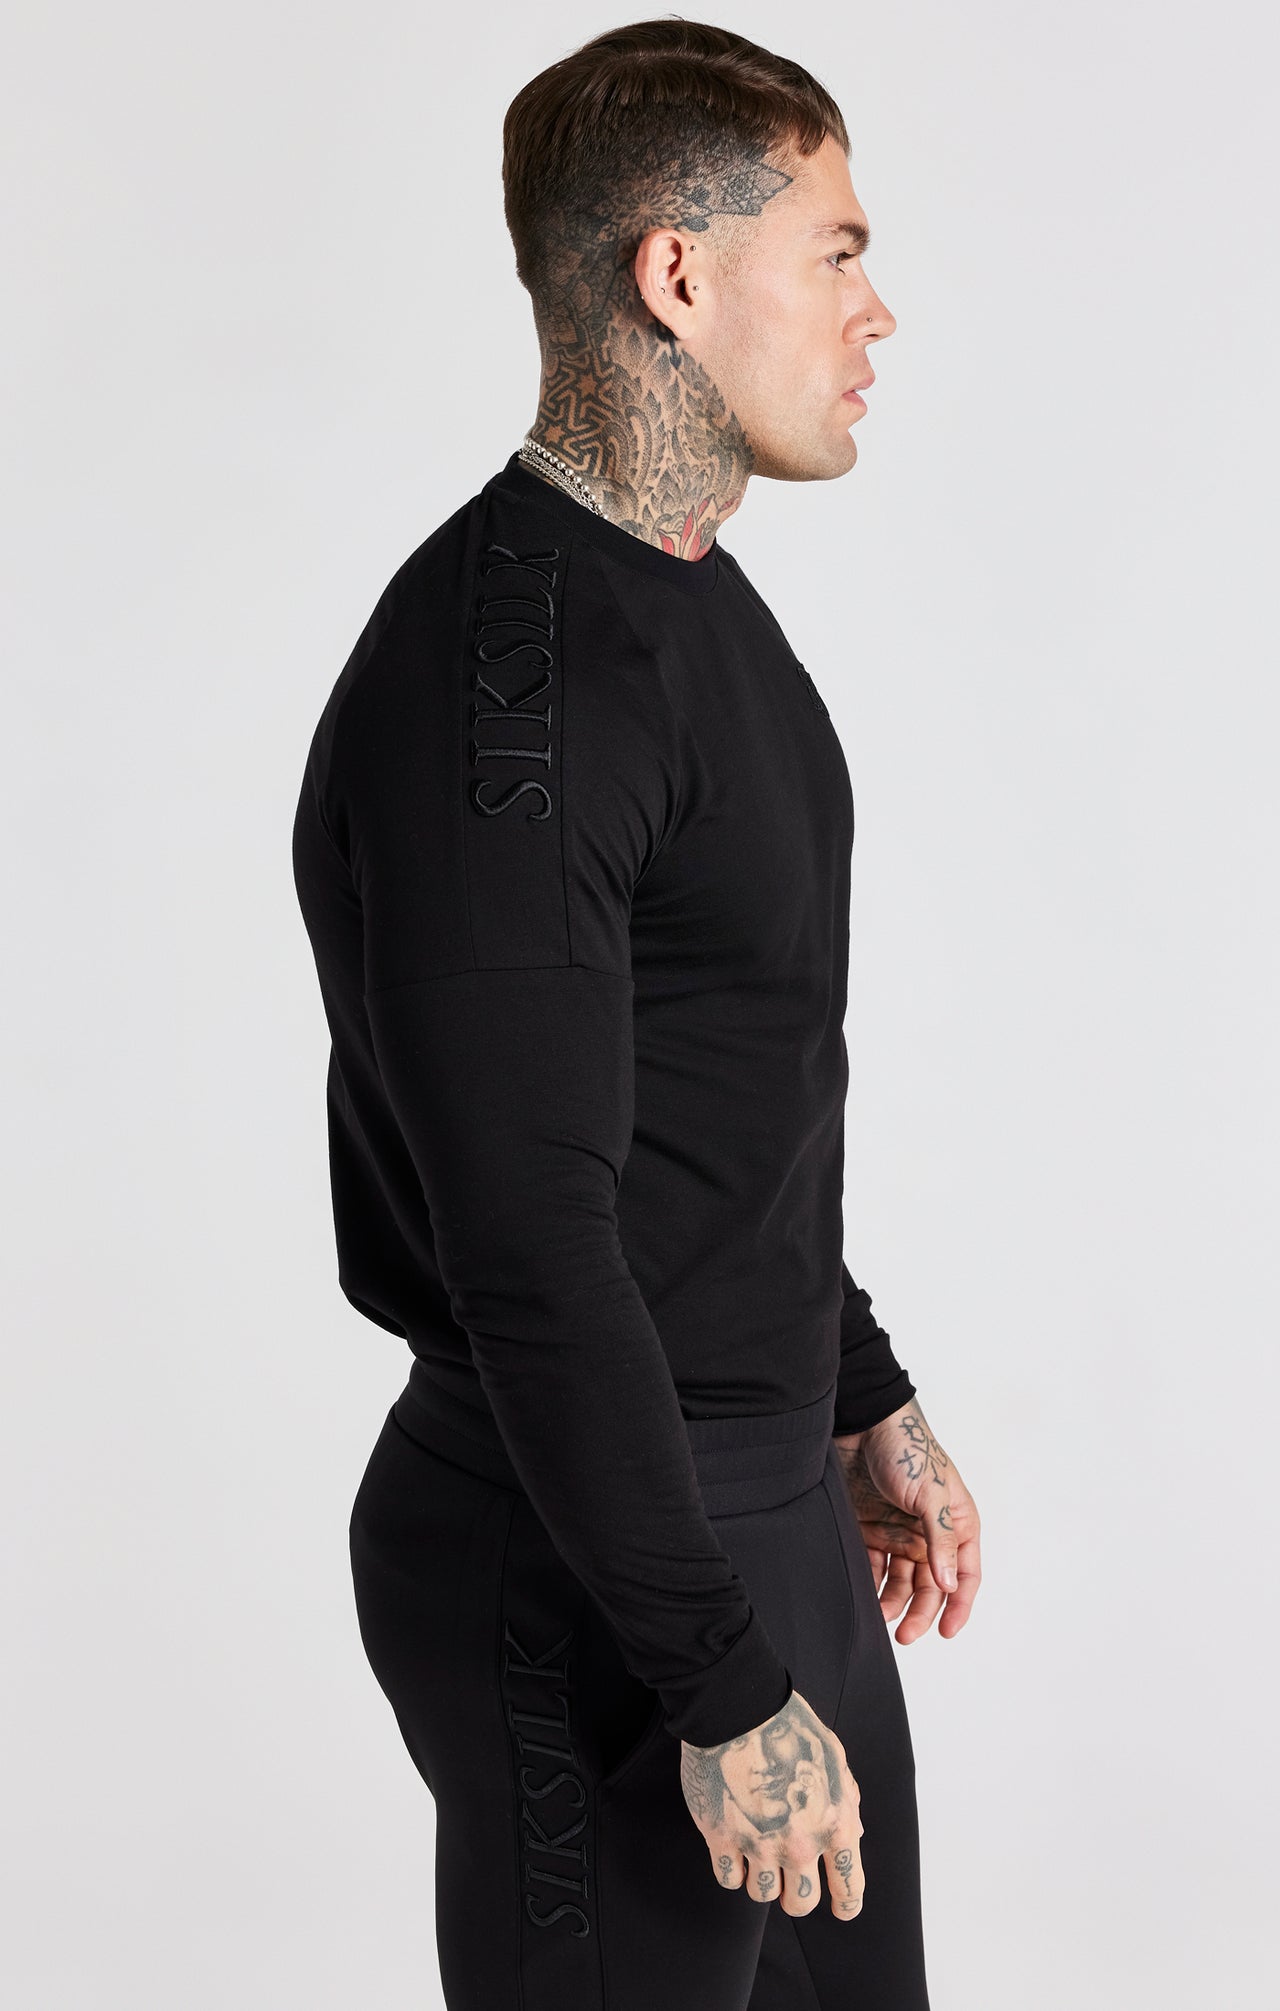 Black Panel Muscle Fit T-Shirt (4)